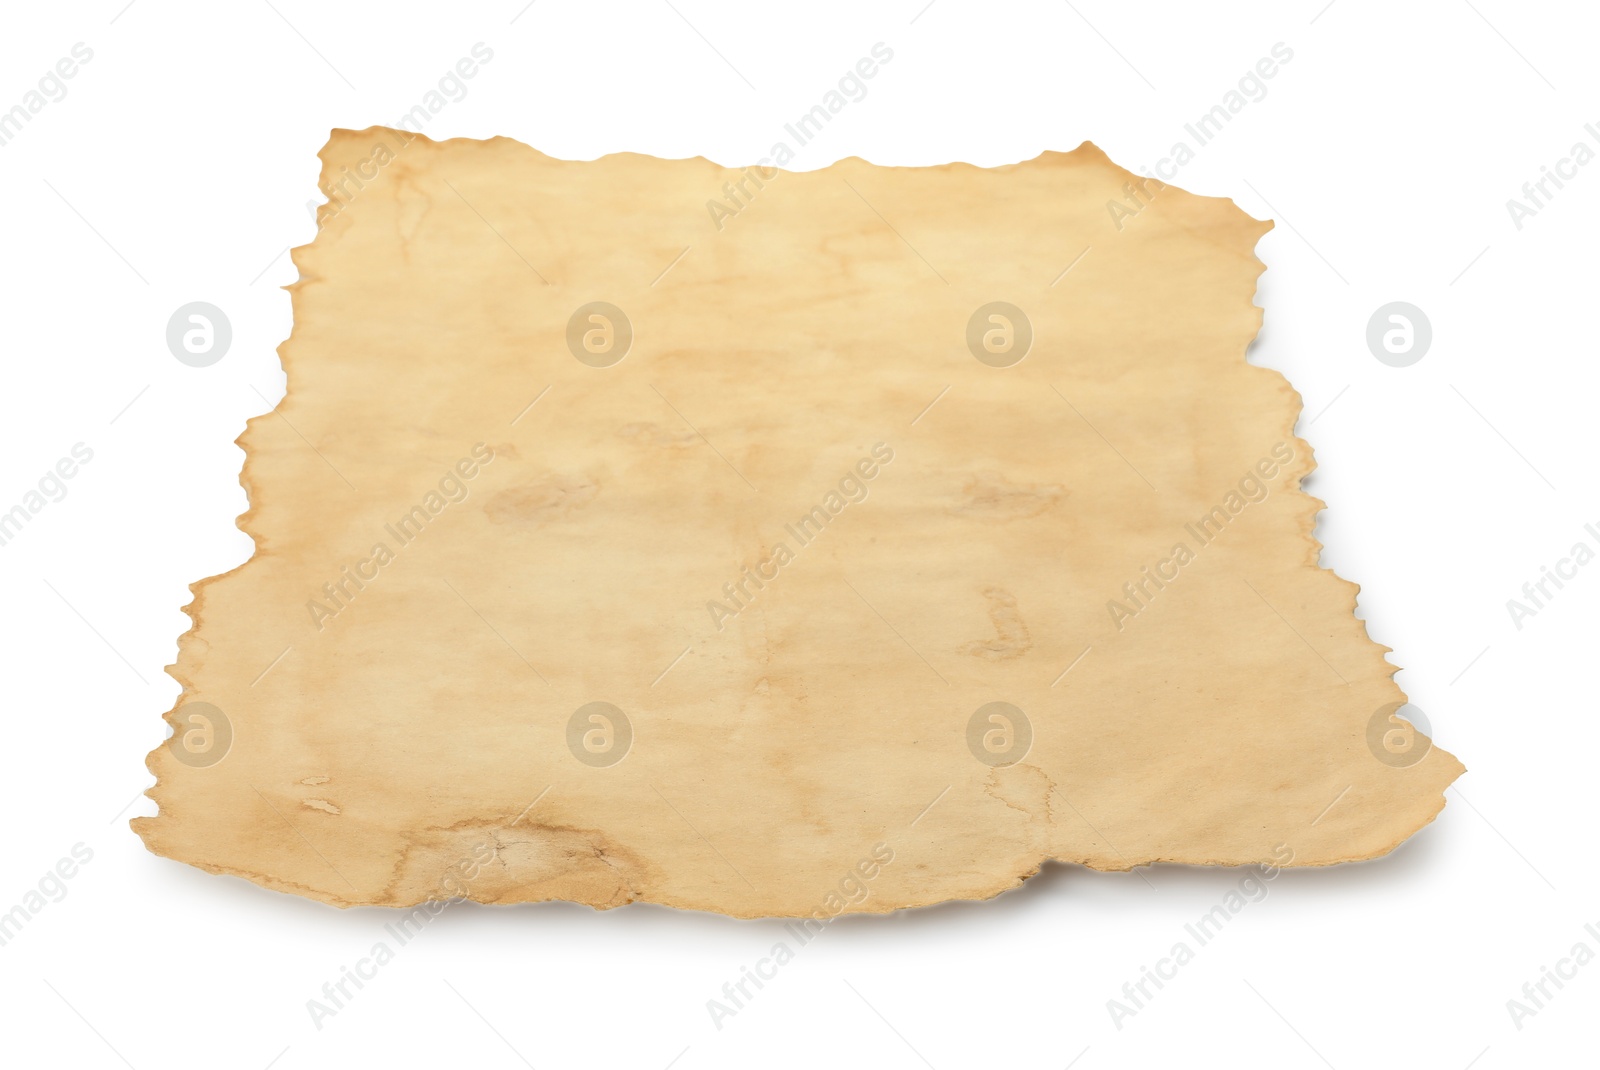 Photo of Sheet of old parchment paper isolated on white